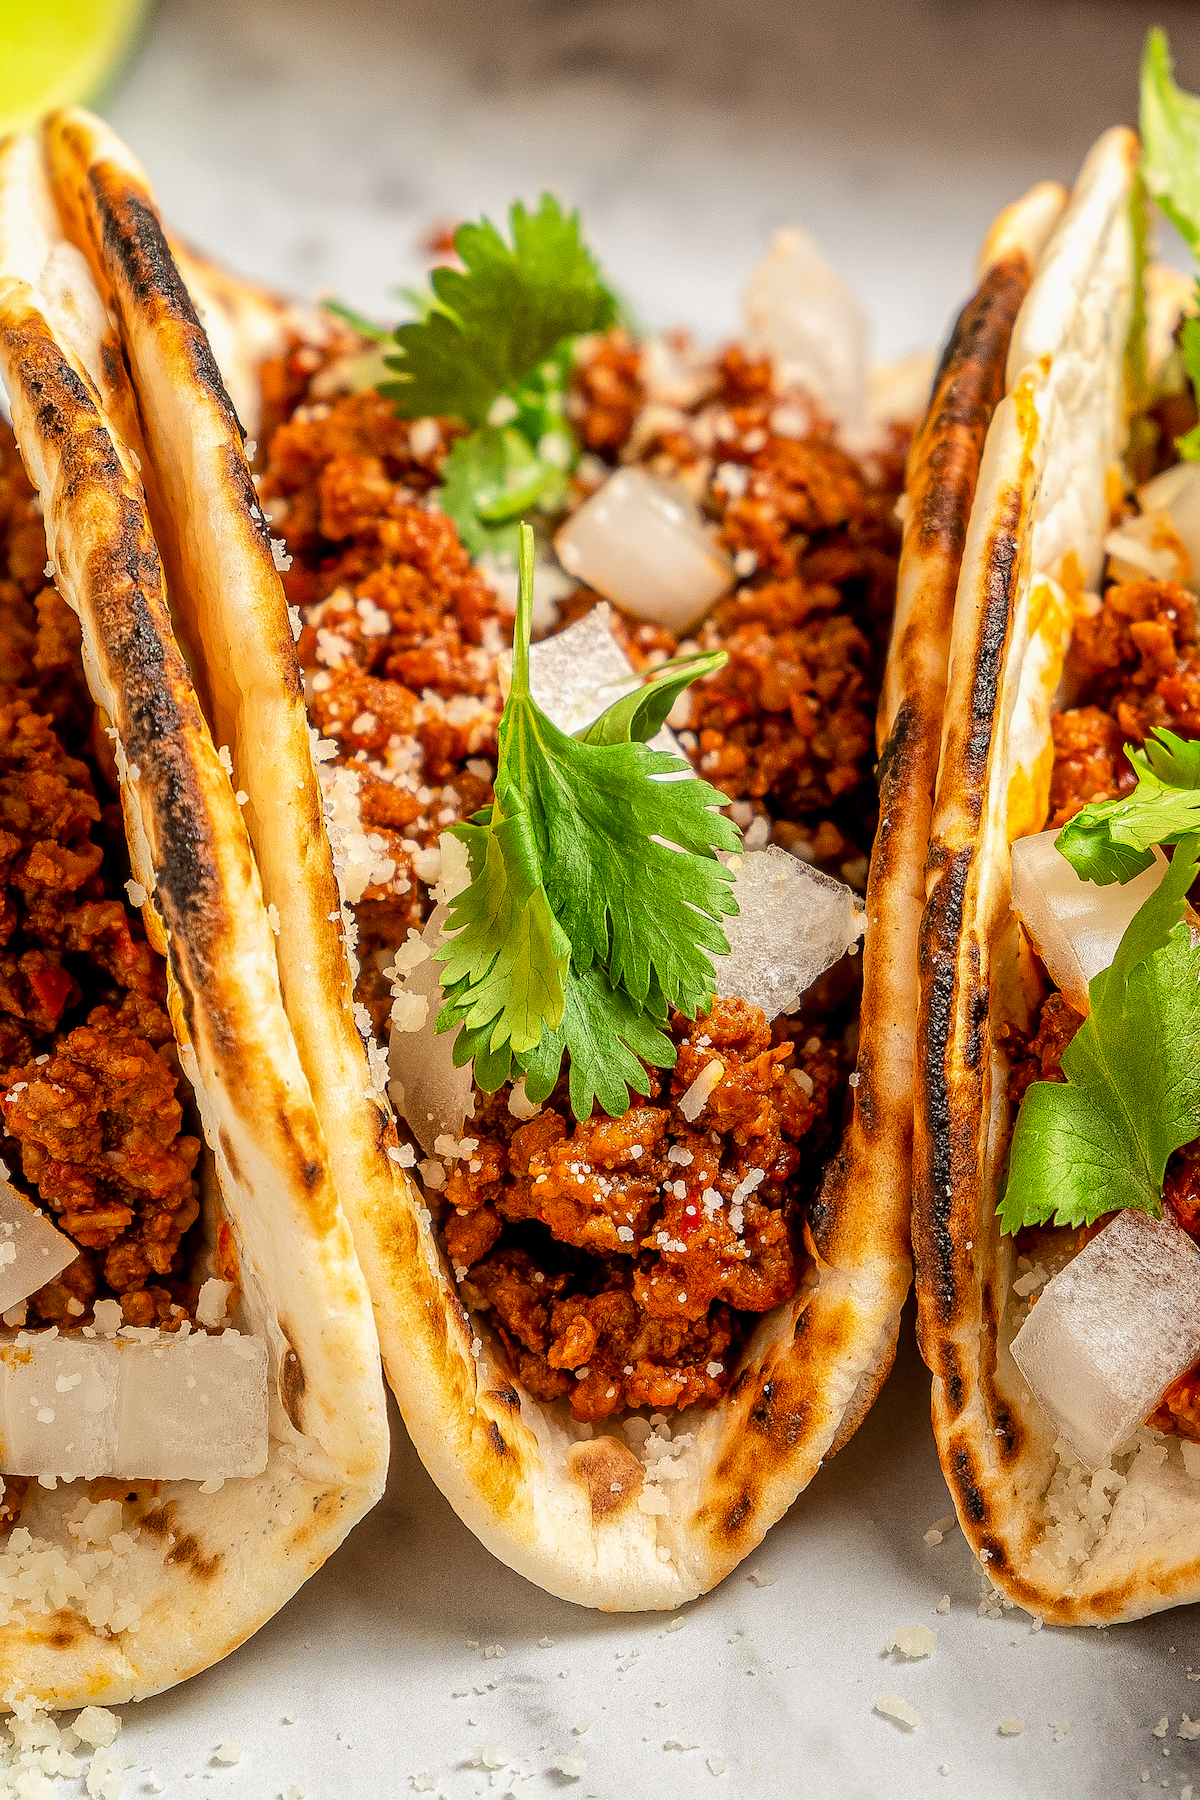 Spicy taco meat wrapped in tortillas with onion, cilantro and crumbled cheese on top.